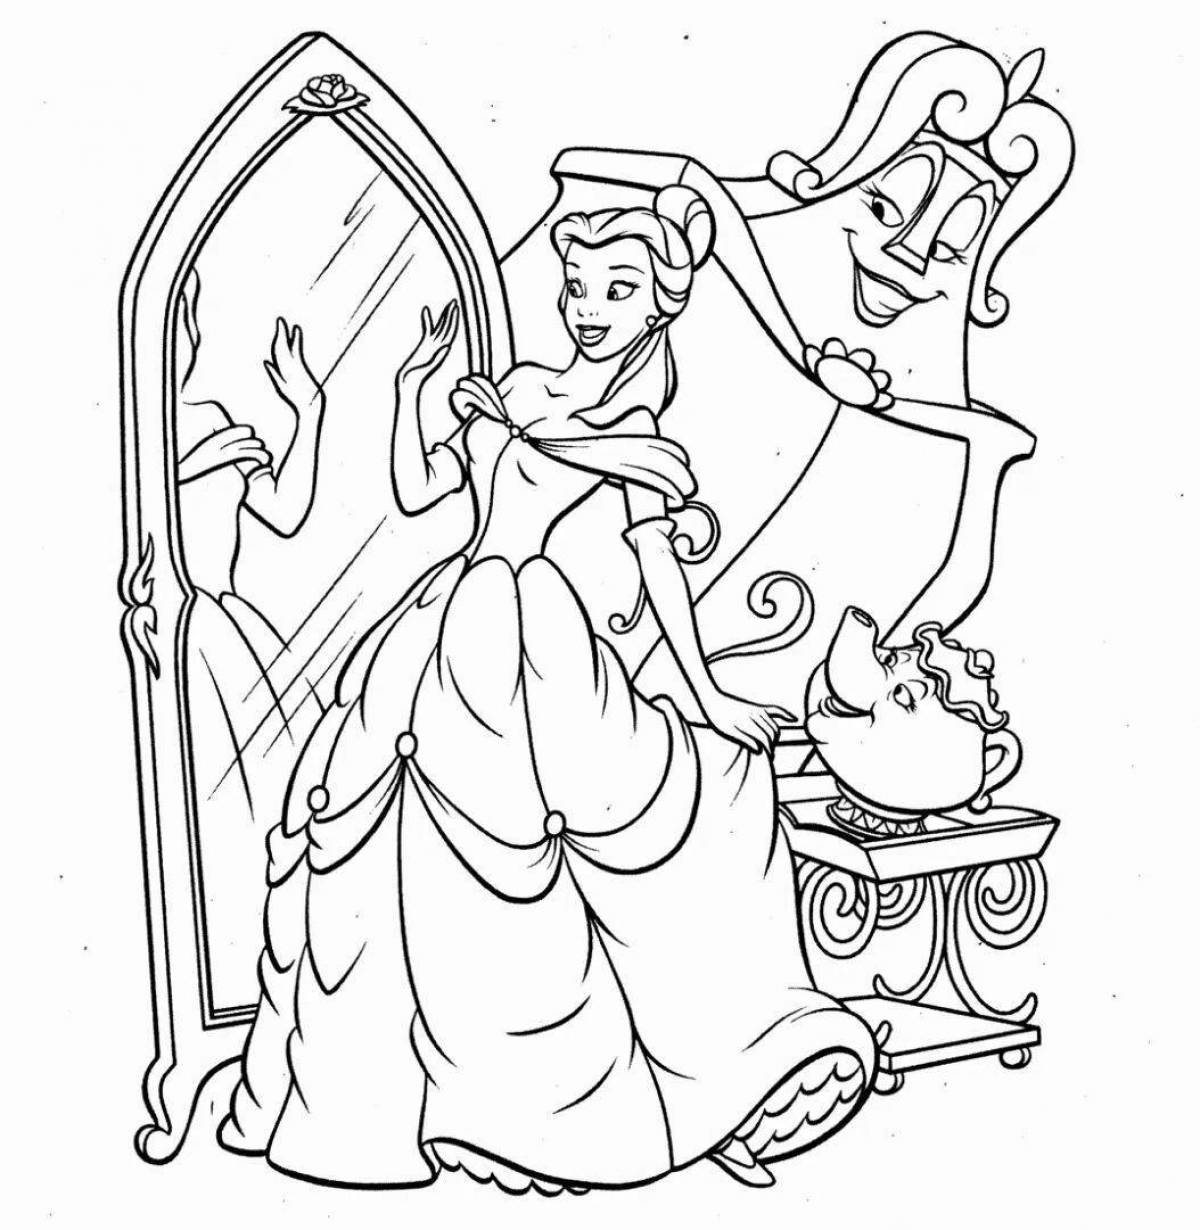 Exquisite belle and the monster coloring book